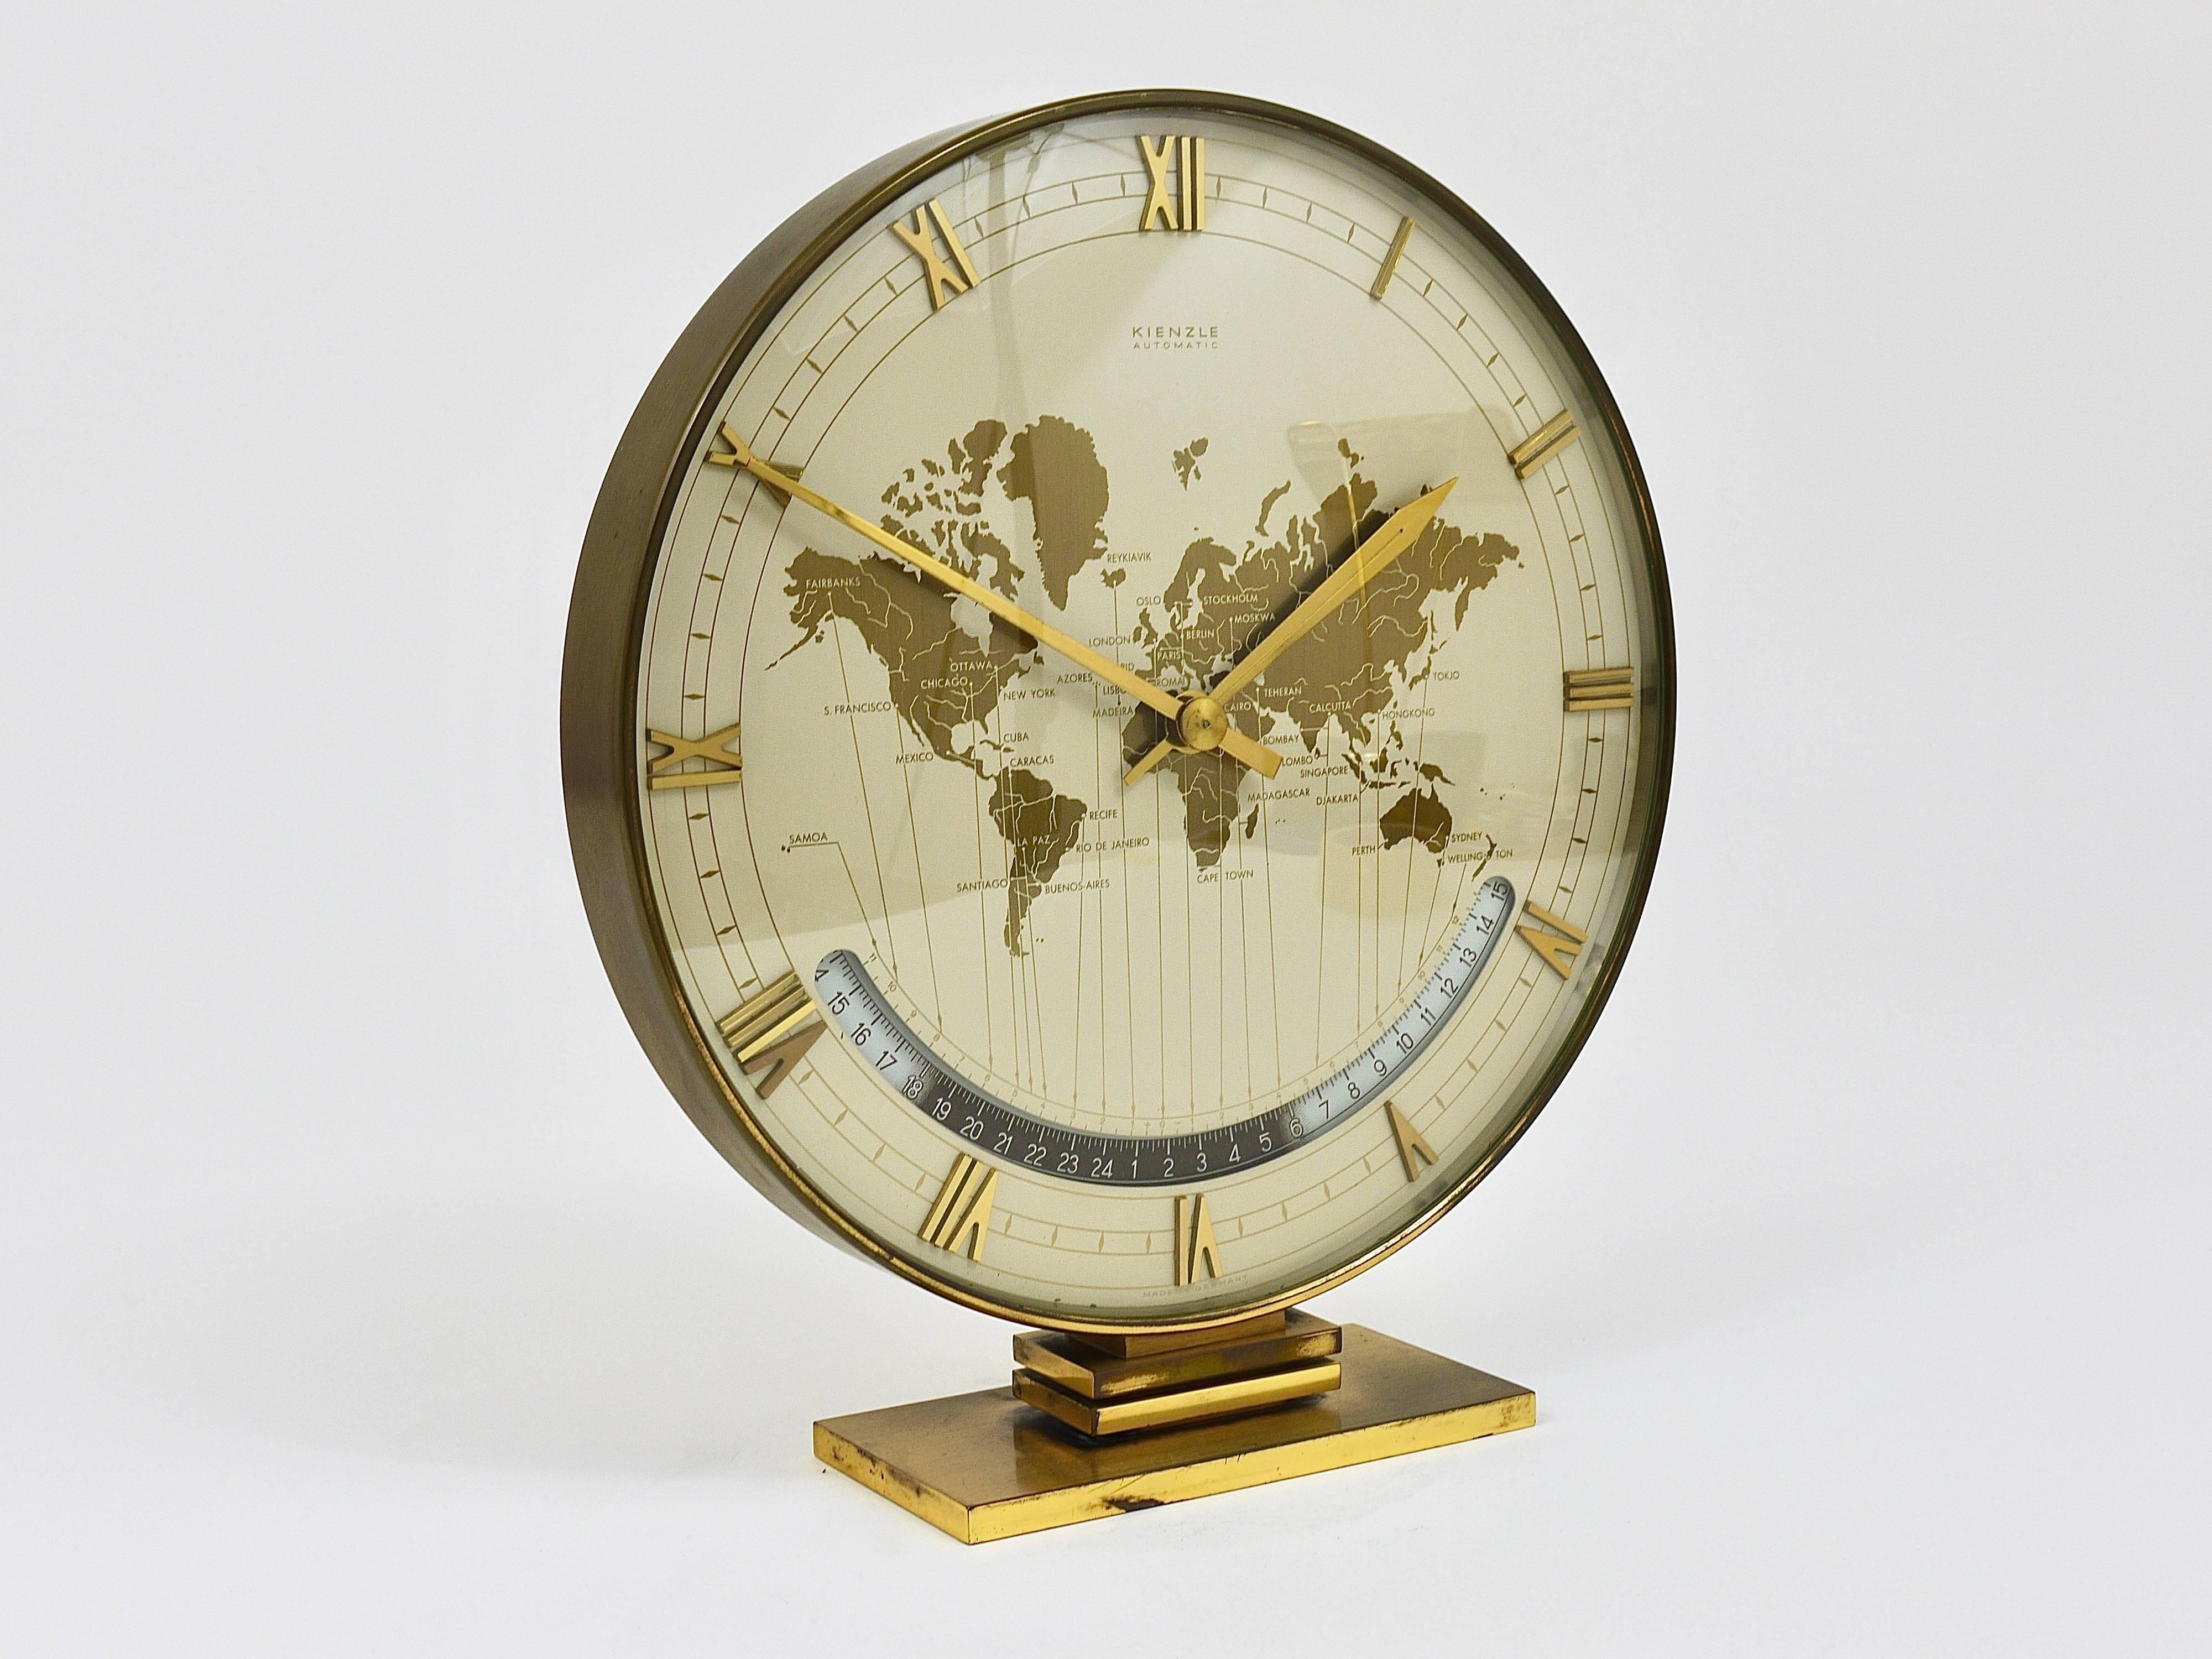 An impressive and large brass and glass modernist desk or table clock with a world map clocks face and world time zones and beautiful digits. Executed in the 1950s by Kienzle Germany. An elegant and solid piece in good condition with charming patina